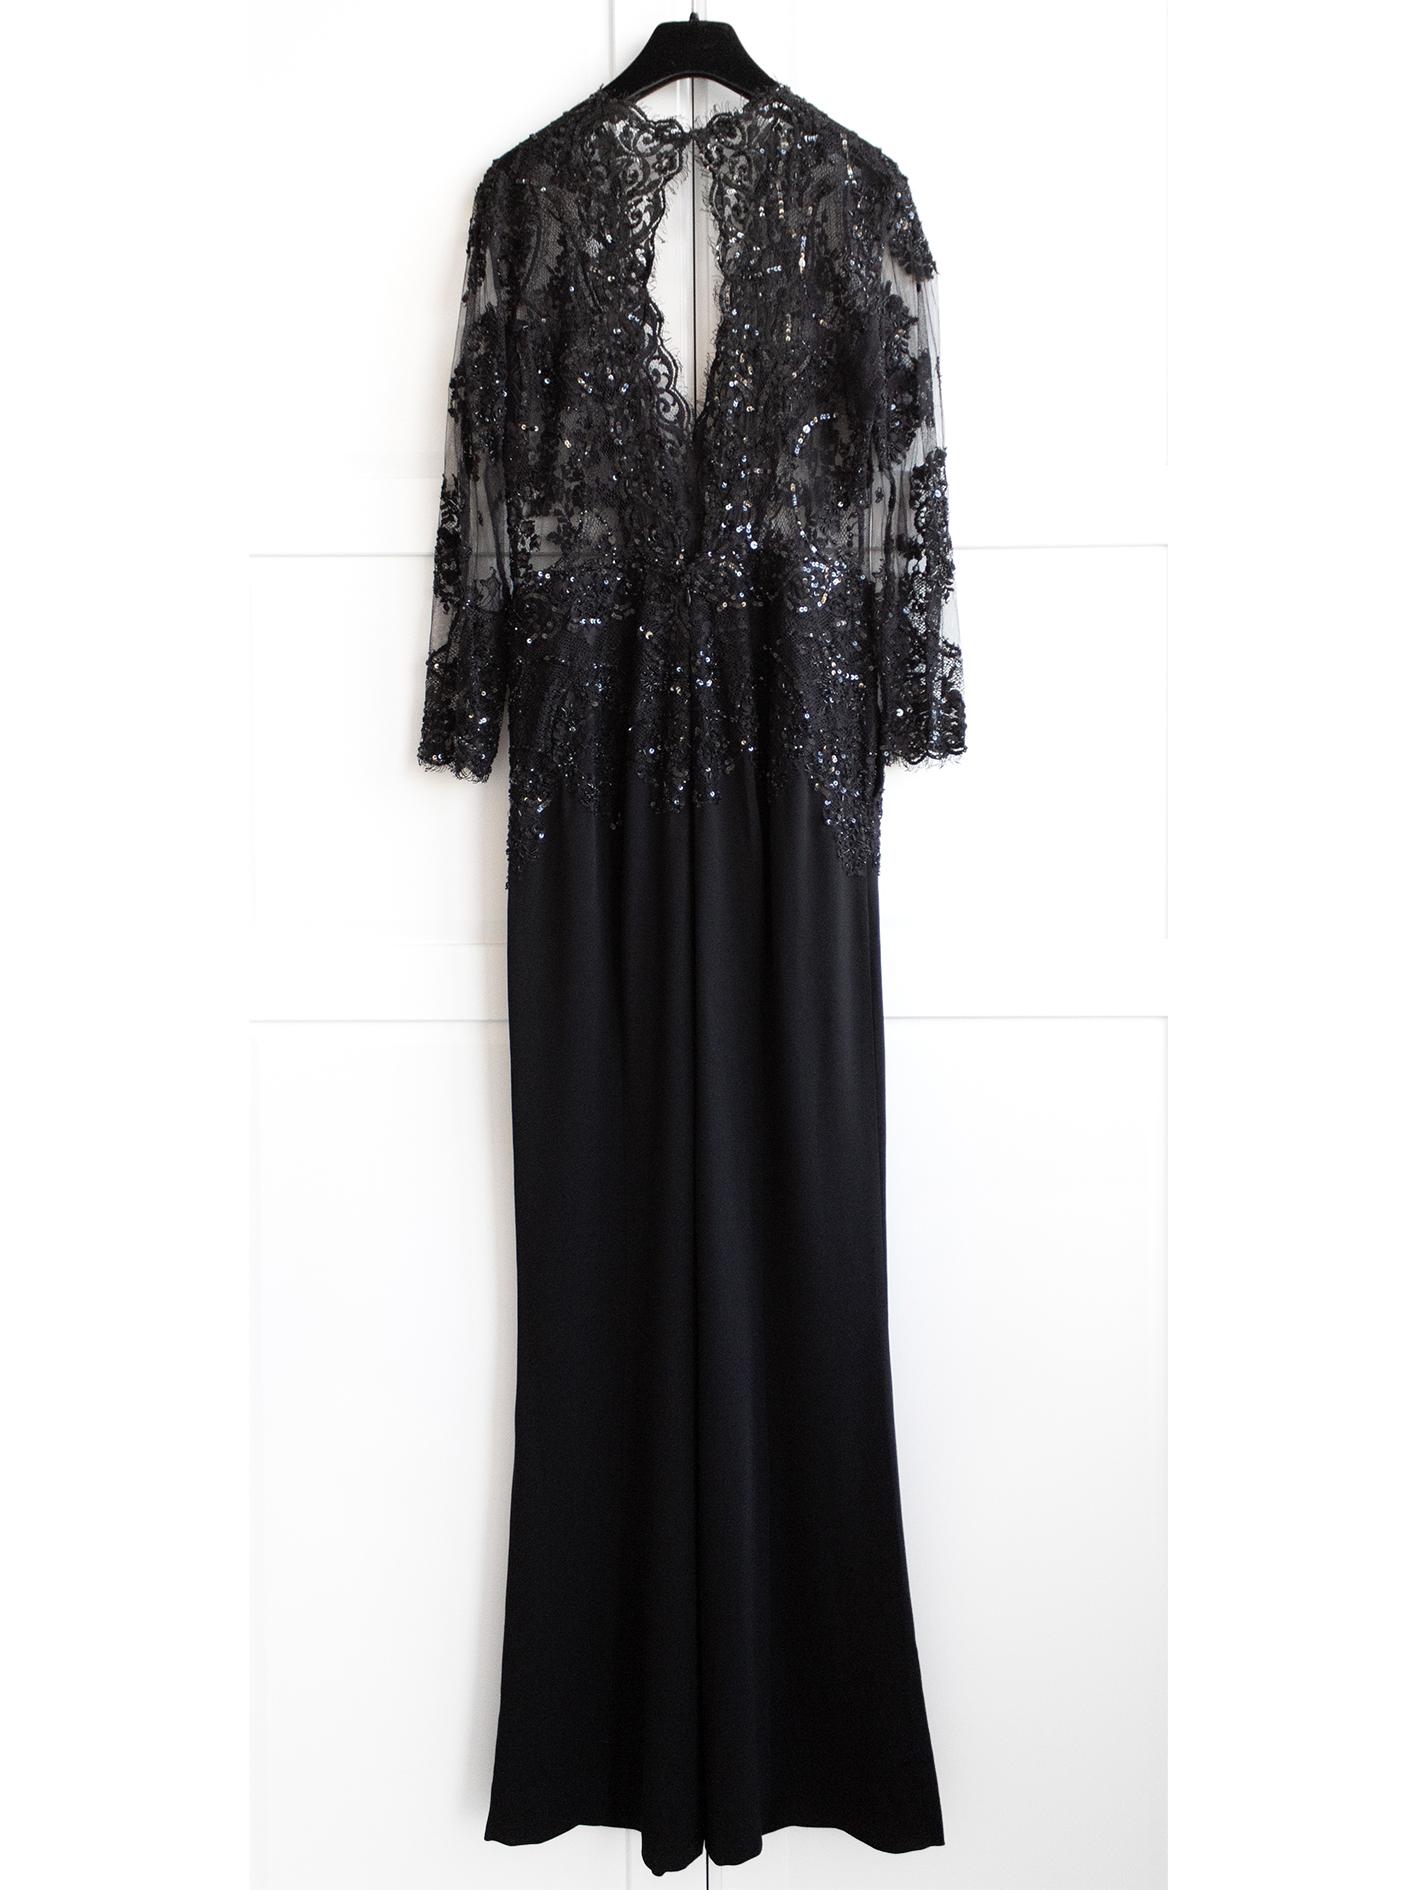 Zuhair Murad Black Lace Embellished Jumpsuit In Excellent Condition For Sale In Jersey City, NJ